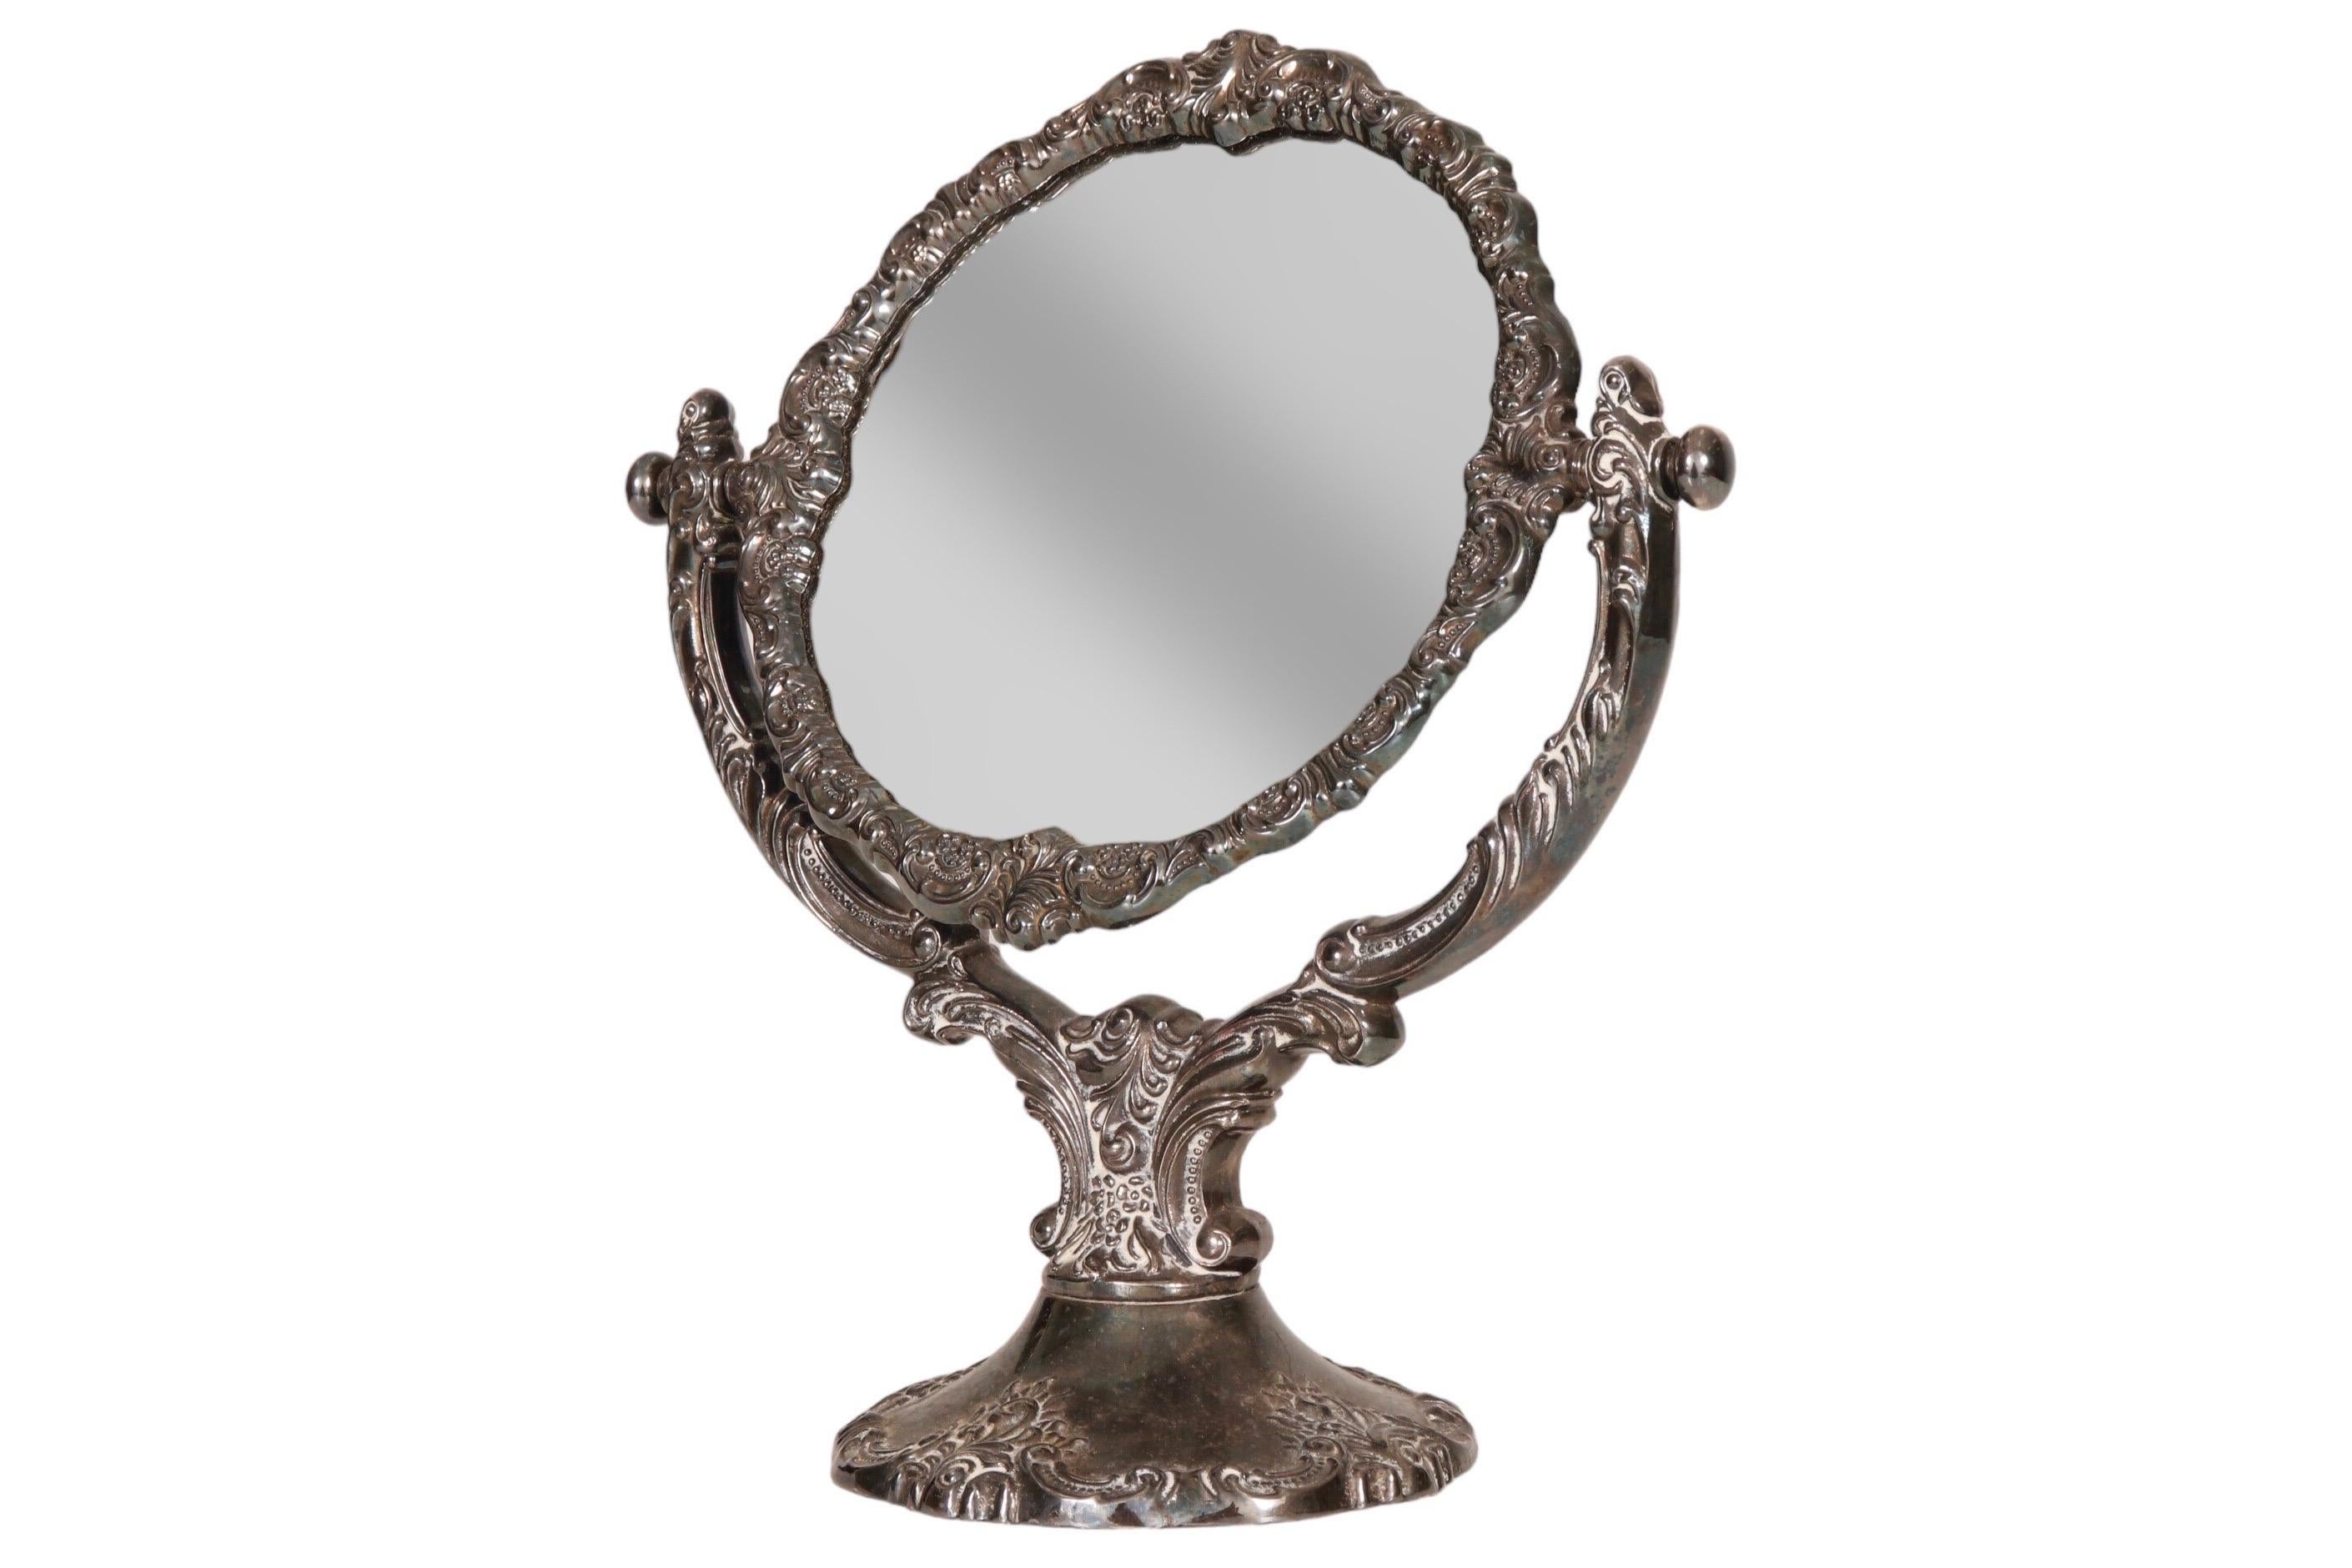 A 1940’s silver plated Baroque style vanity mirror made by Wallace. A round mirror is set in an elaborate adjustable frame, cast with c scrolls, feathers and beading. The back is finished with blue velvet.